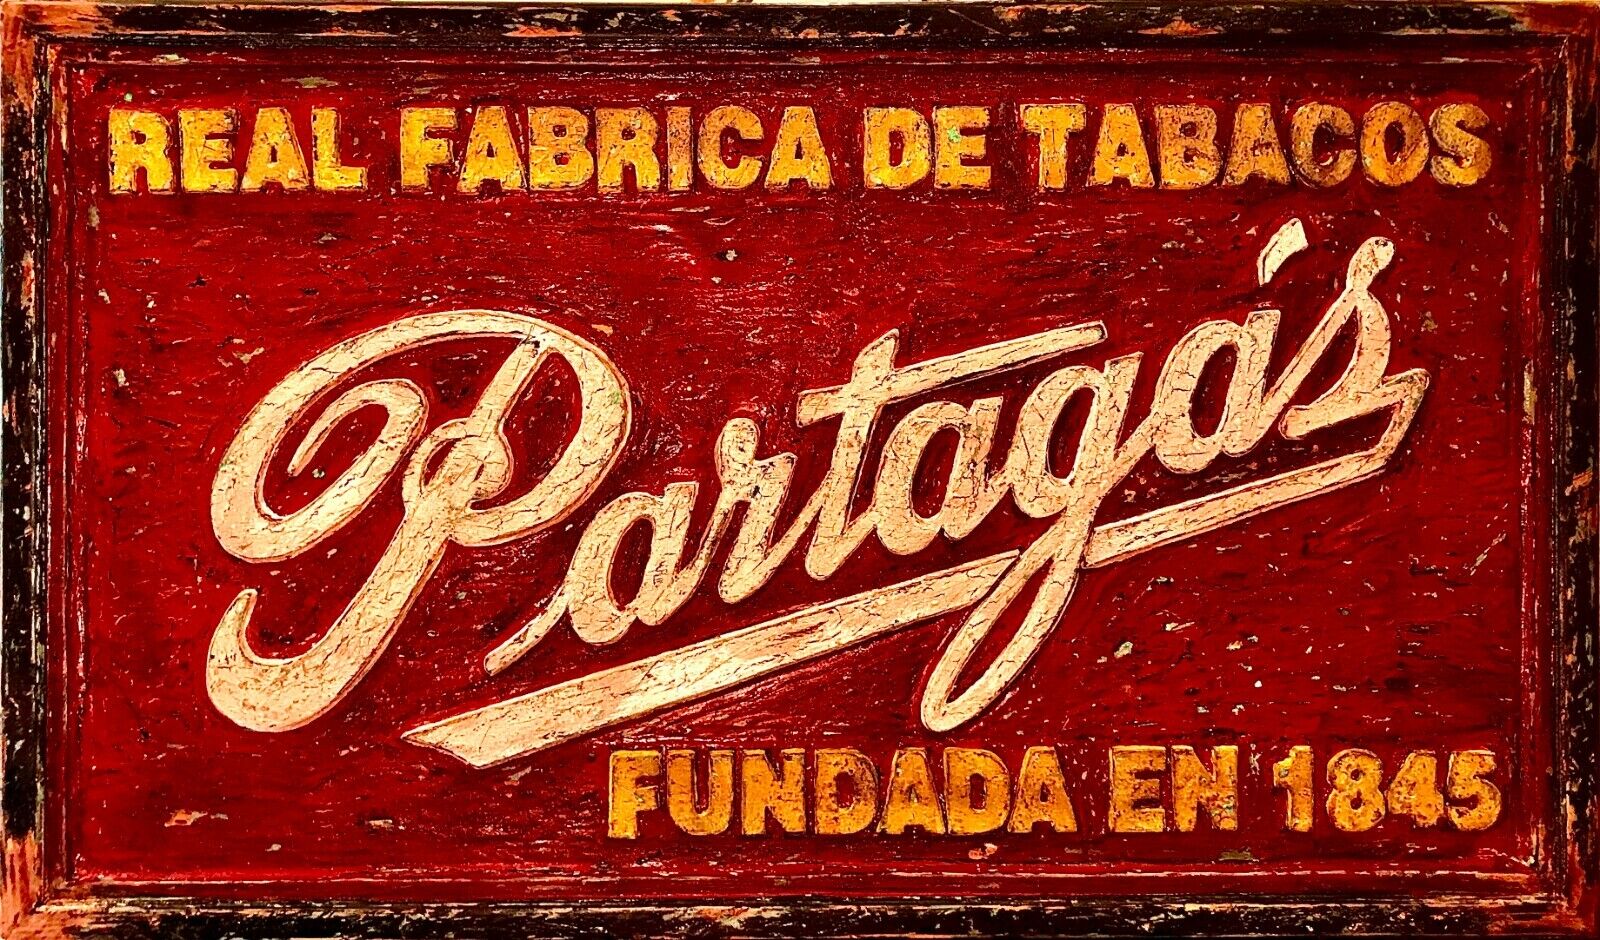 Old Partagas Cigar Factory Sign Print Poster, 12 x 8, Printed in USA